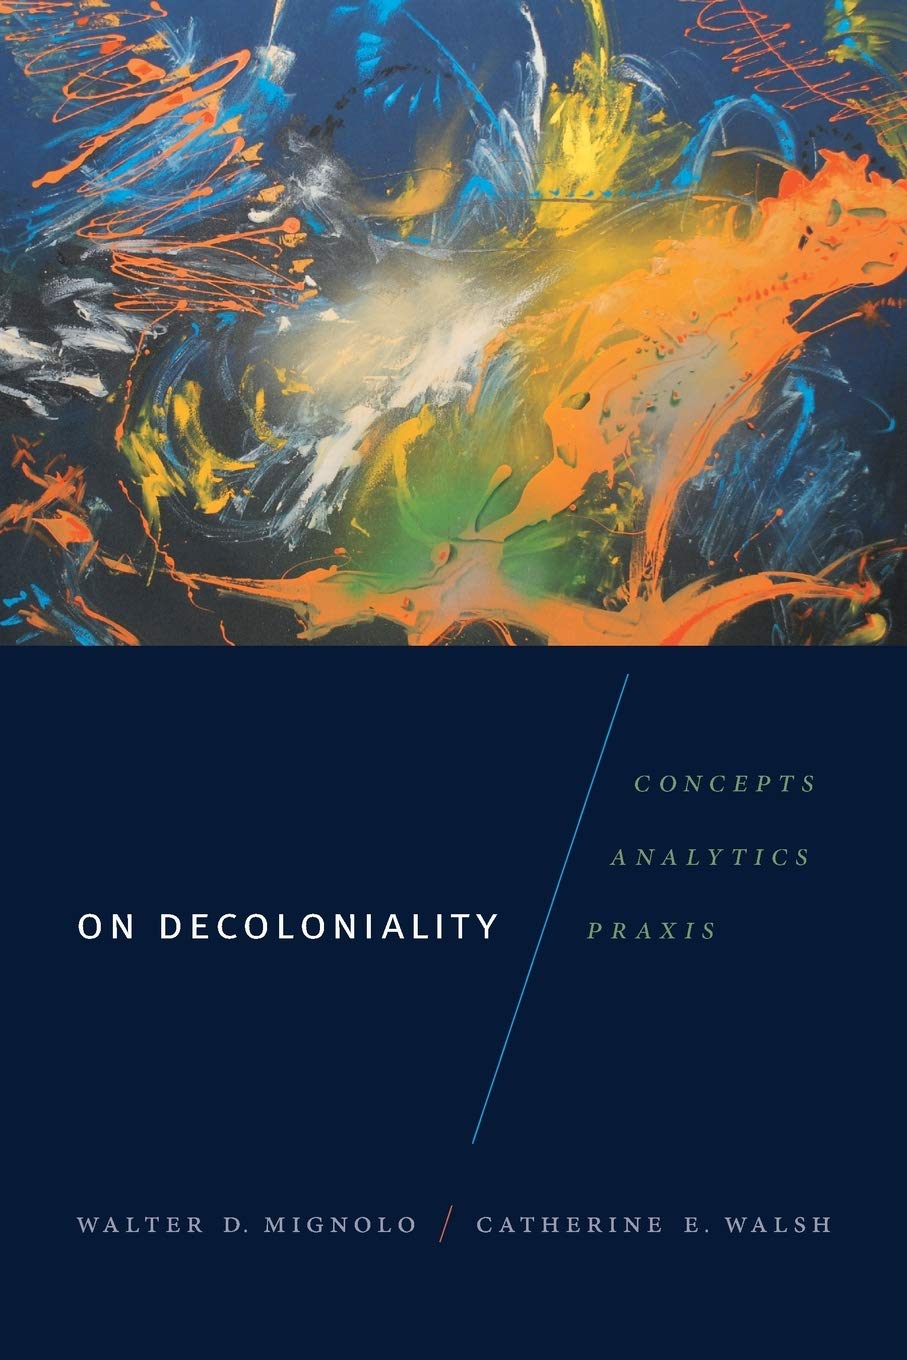 On Decoloniality: Concepts, Analytics, Praxis by Walter D. Mignolo, Catherine E. Walsh